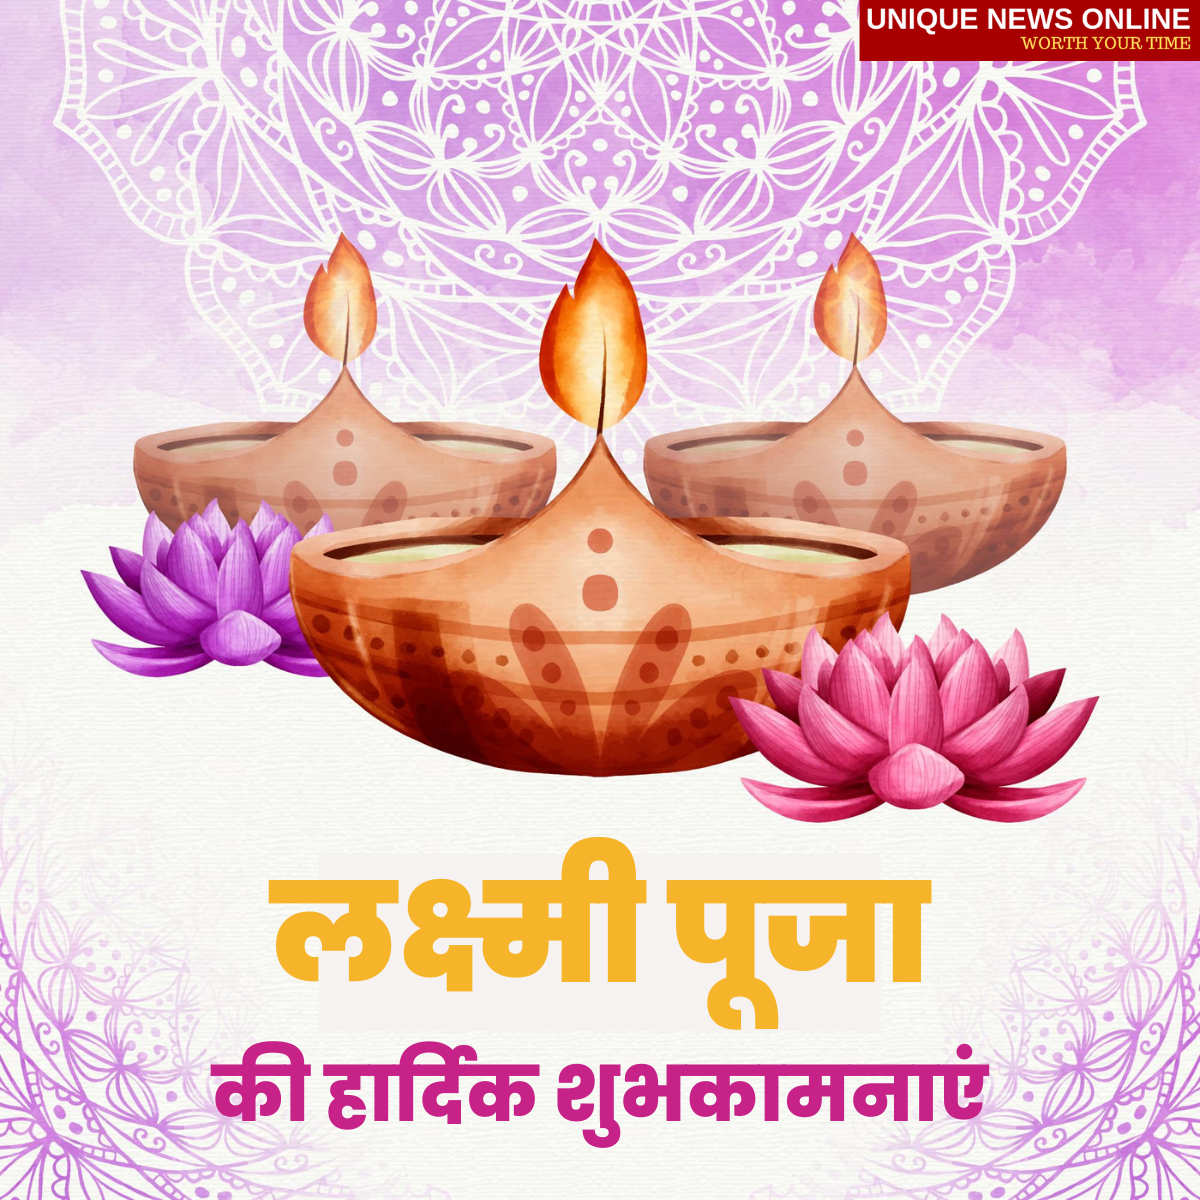 Happy Diwali Lakshmi Puja 2022: Best Hindi and Marathi Quotes, Messages, Wishes, Greetings, Posters, Images, Shayari To Share